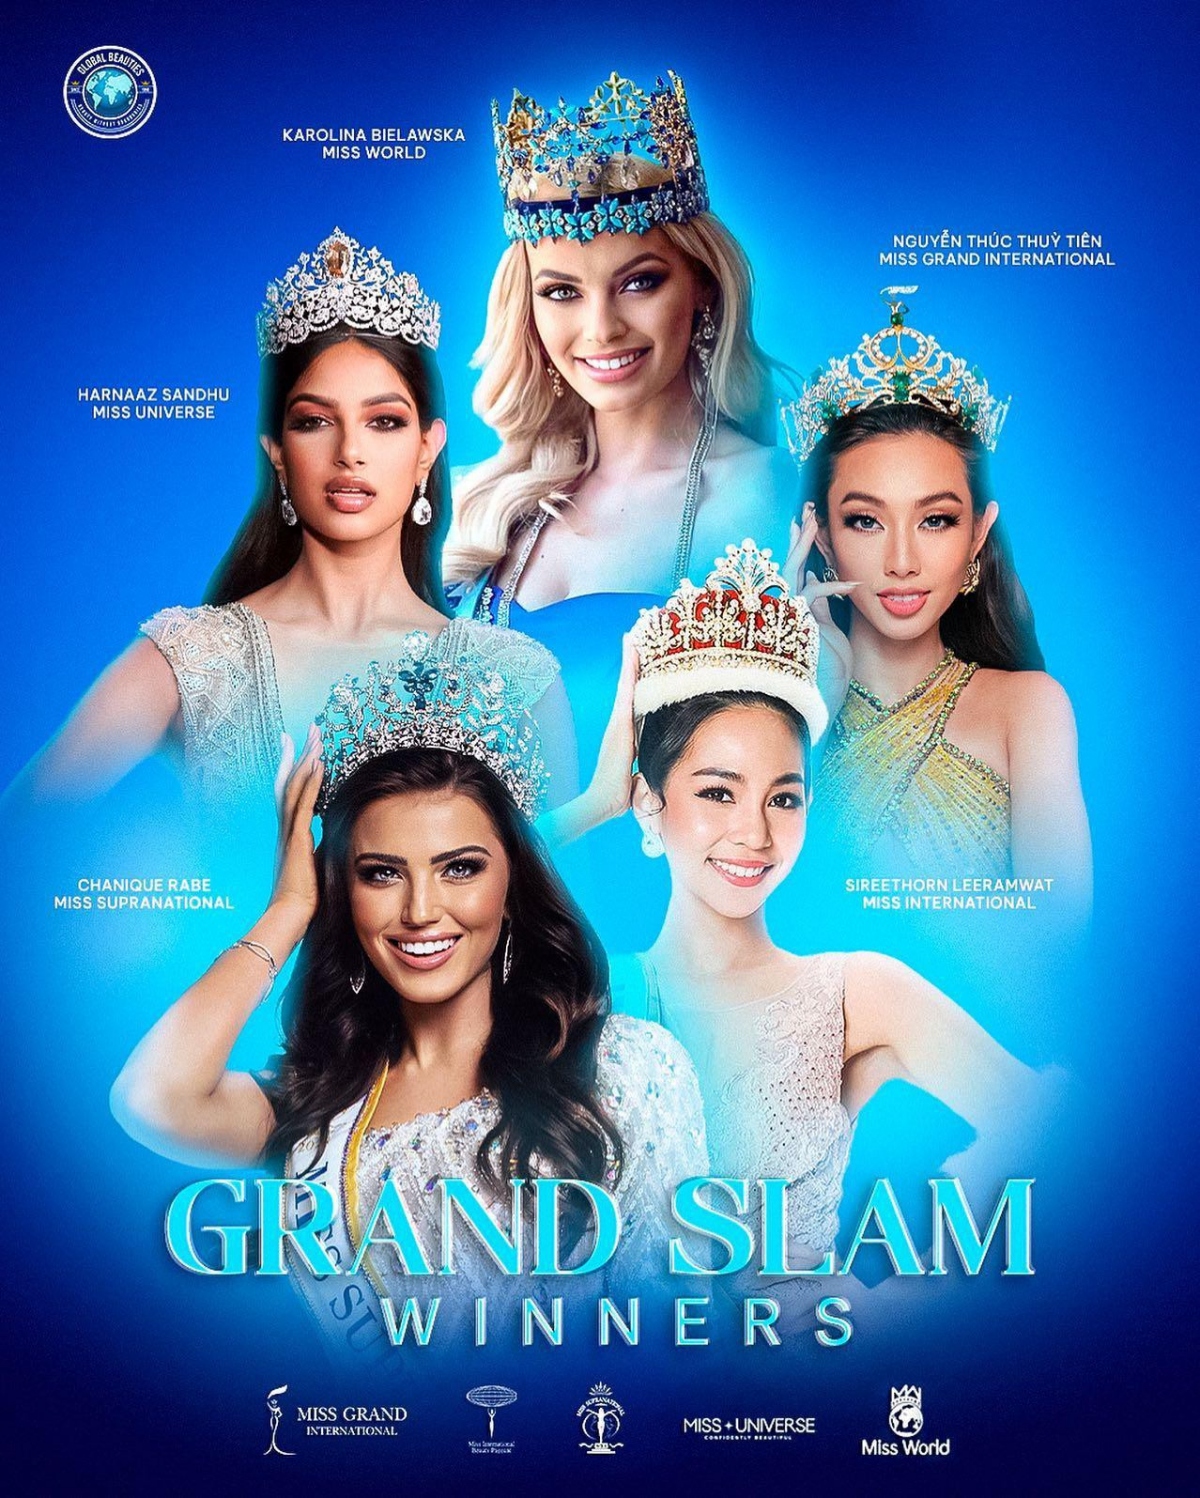 Global Beauties unveiled a list of the winners of the five largest beauty pageants in the world, including Miss World, Miss Universe, Miss International, Miss Supranational, and Miss Grand International, with Vietnamese representative Thuy Tien being honoured among them.